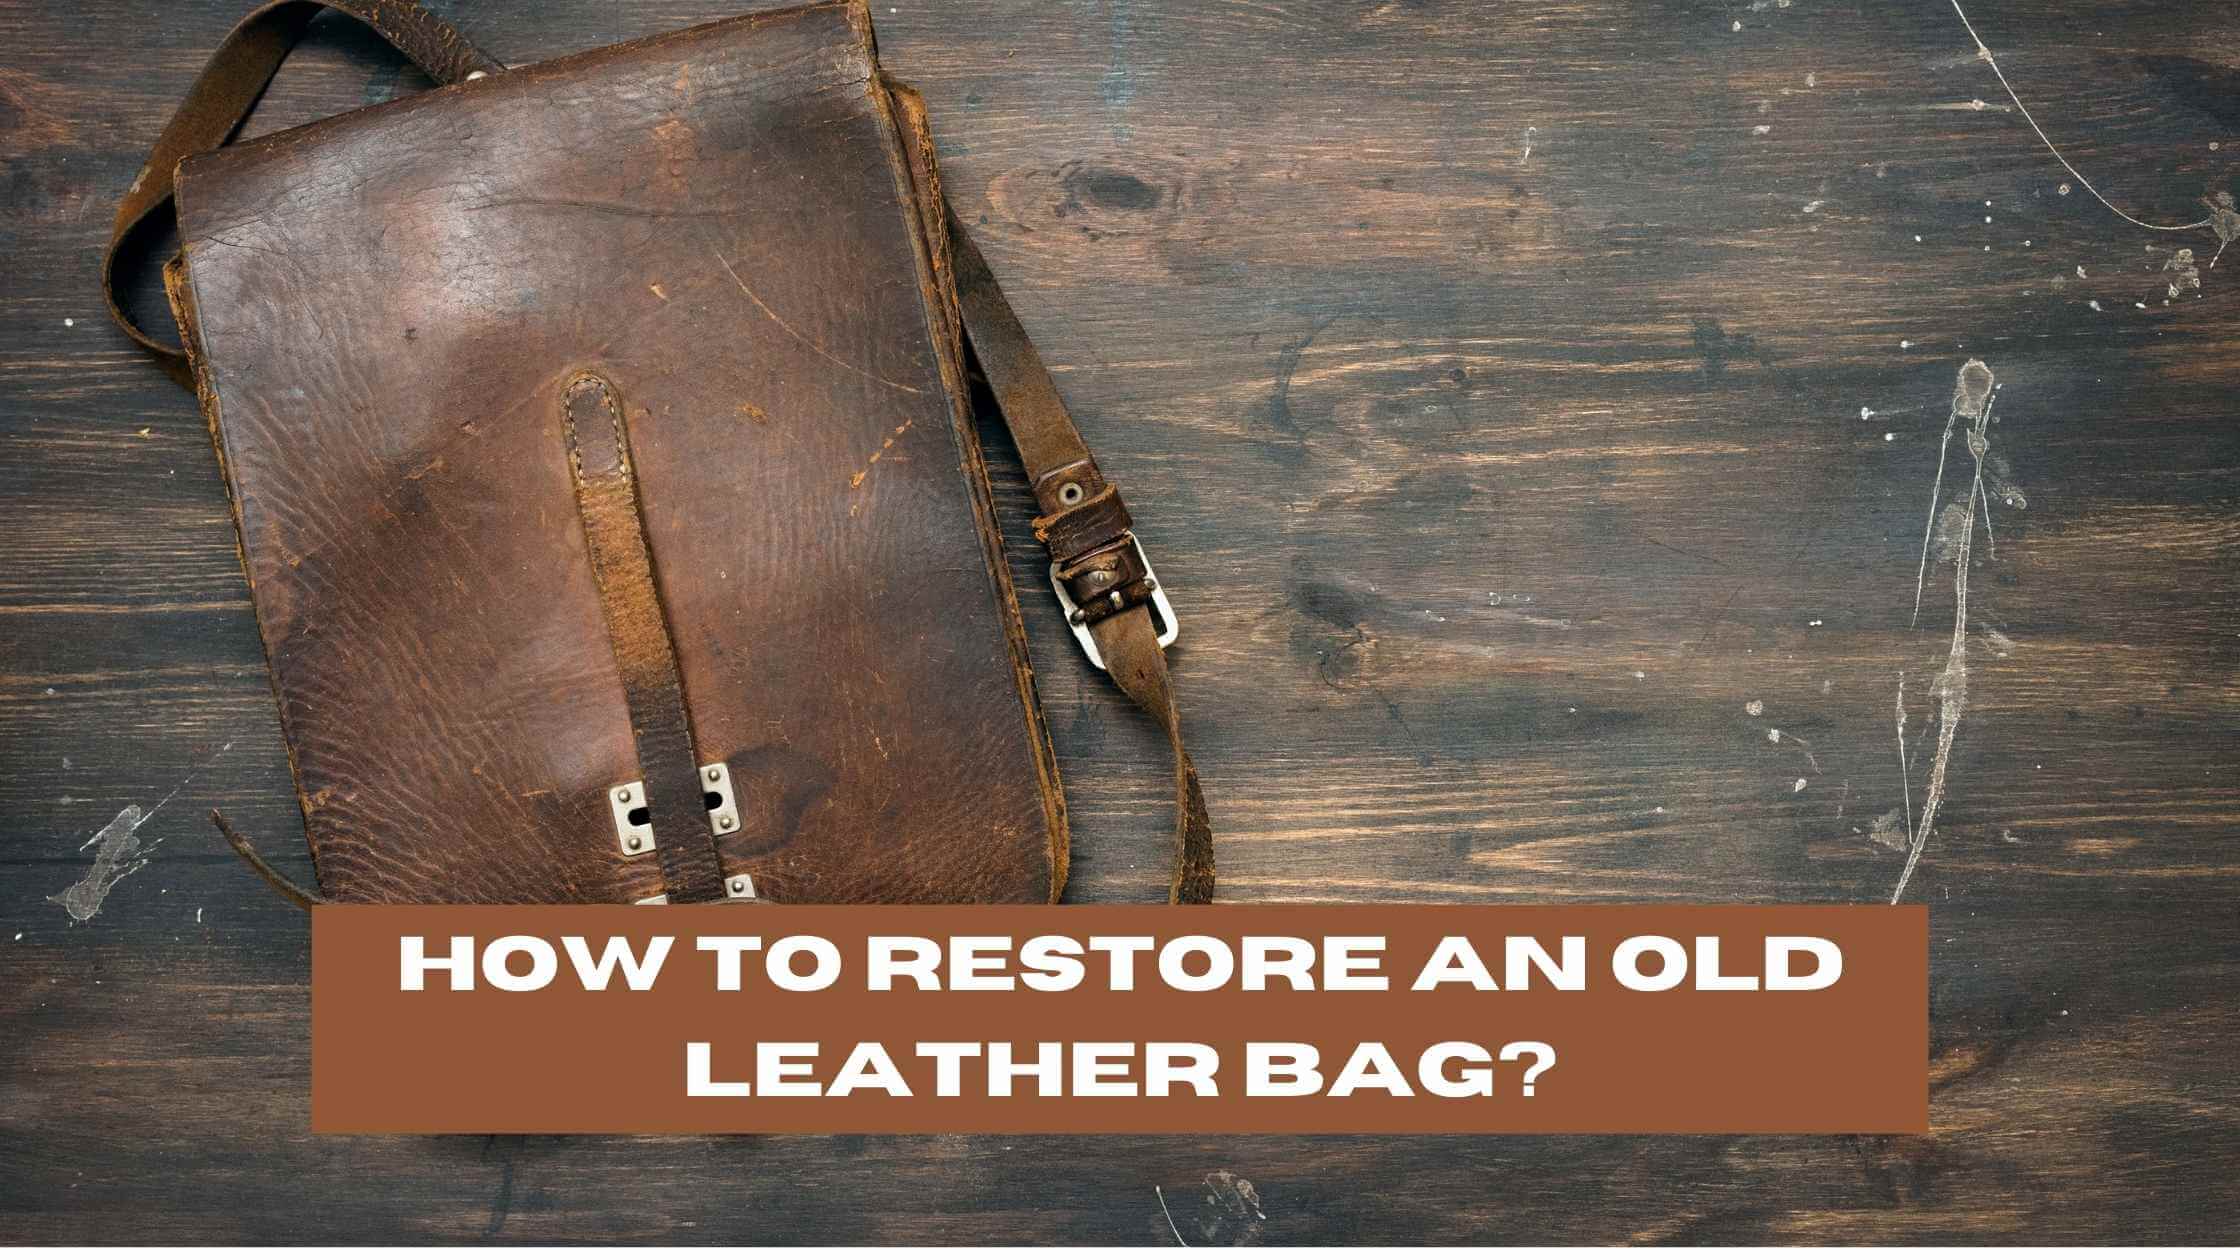 How to Restore an Old Leather Bag